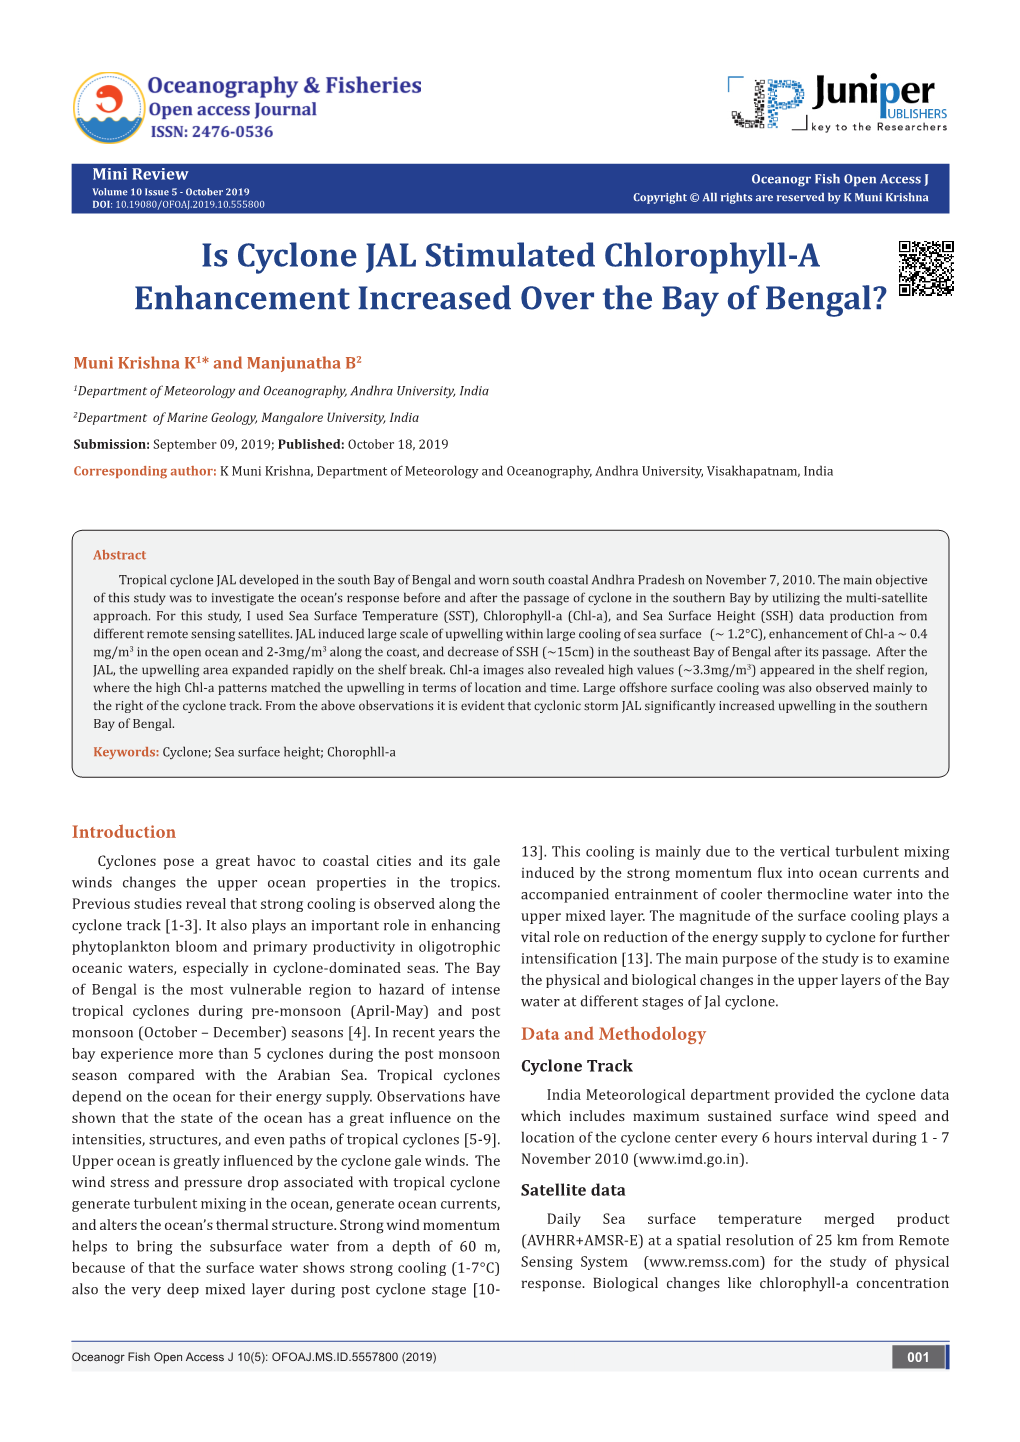 Is Cyclone JAL Stimulated Chlorophyll-A Enhancement Increased Over the Bay of Bengal?